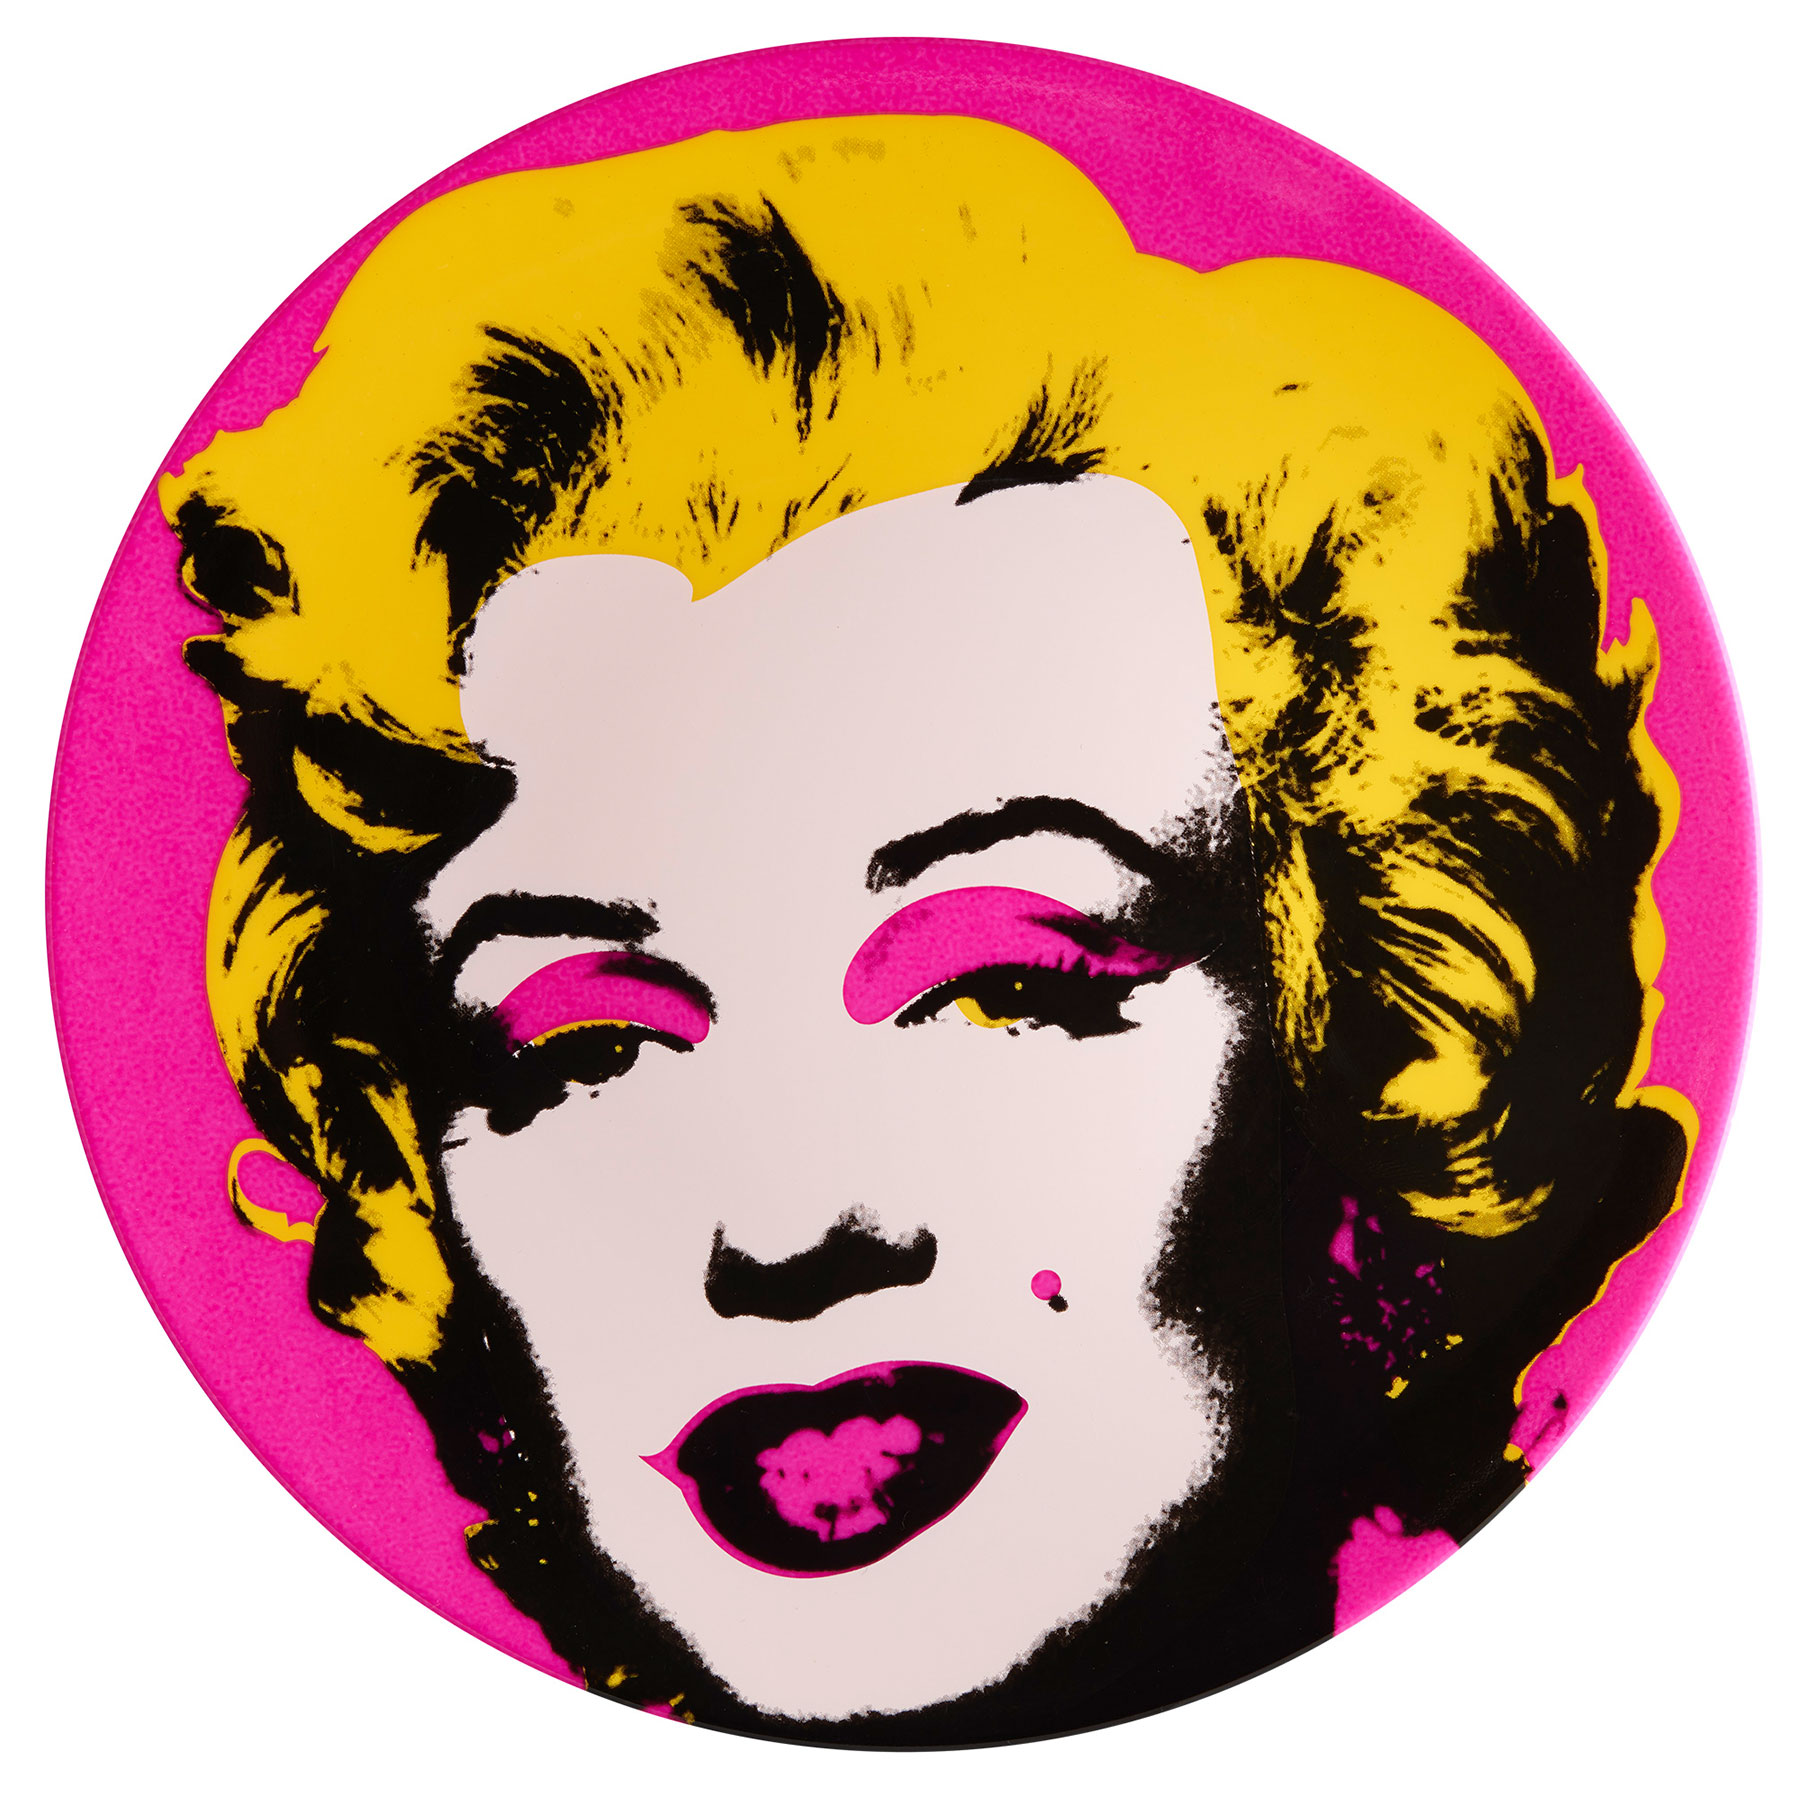 Porcelain plate "Marilyn" (pink) by Andy Warhol